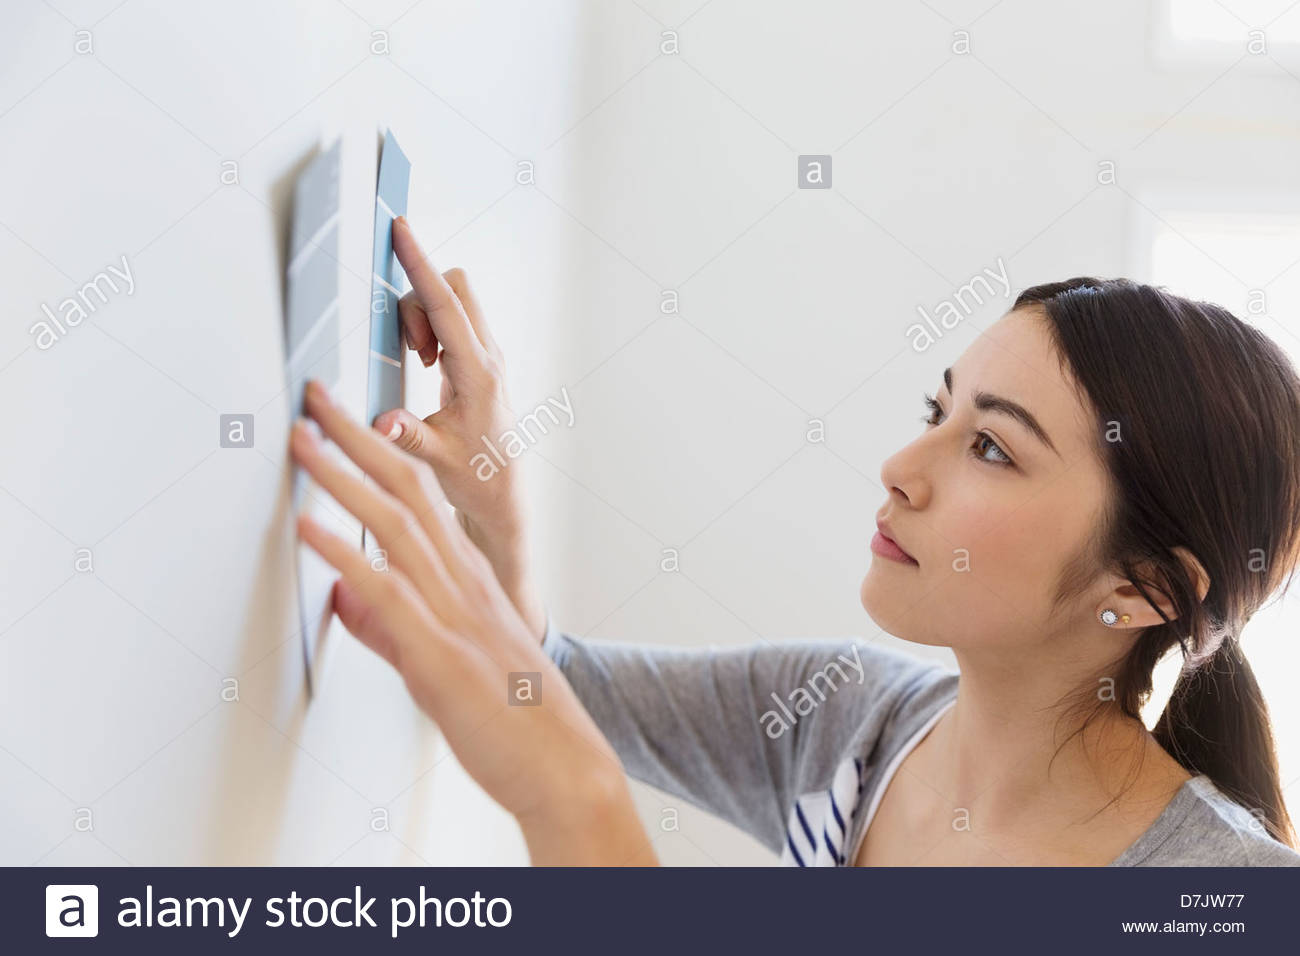 Young woman choosing paint colors at home Stock Photo